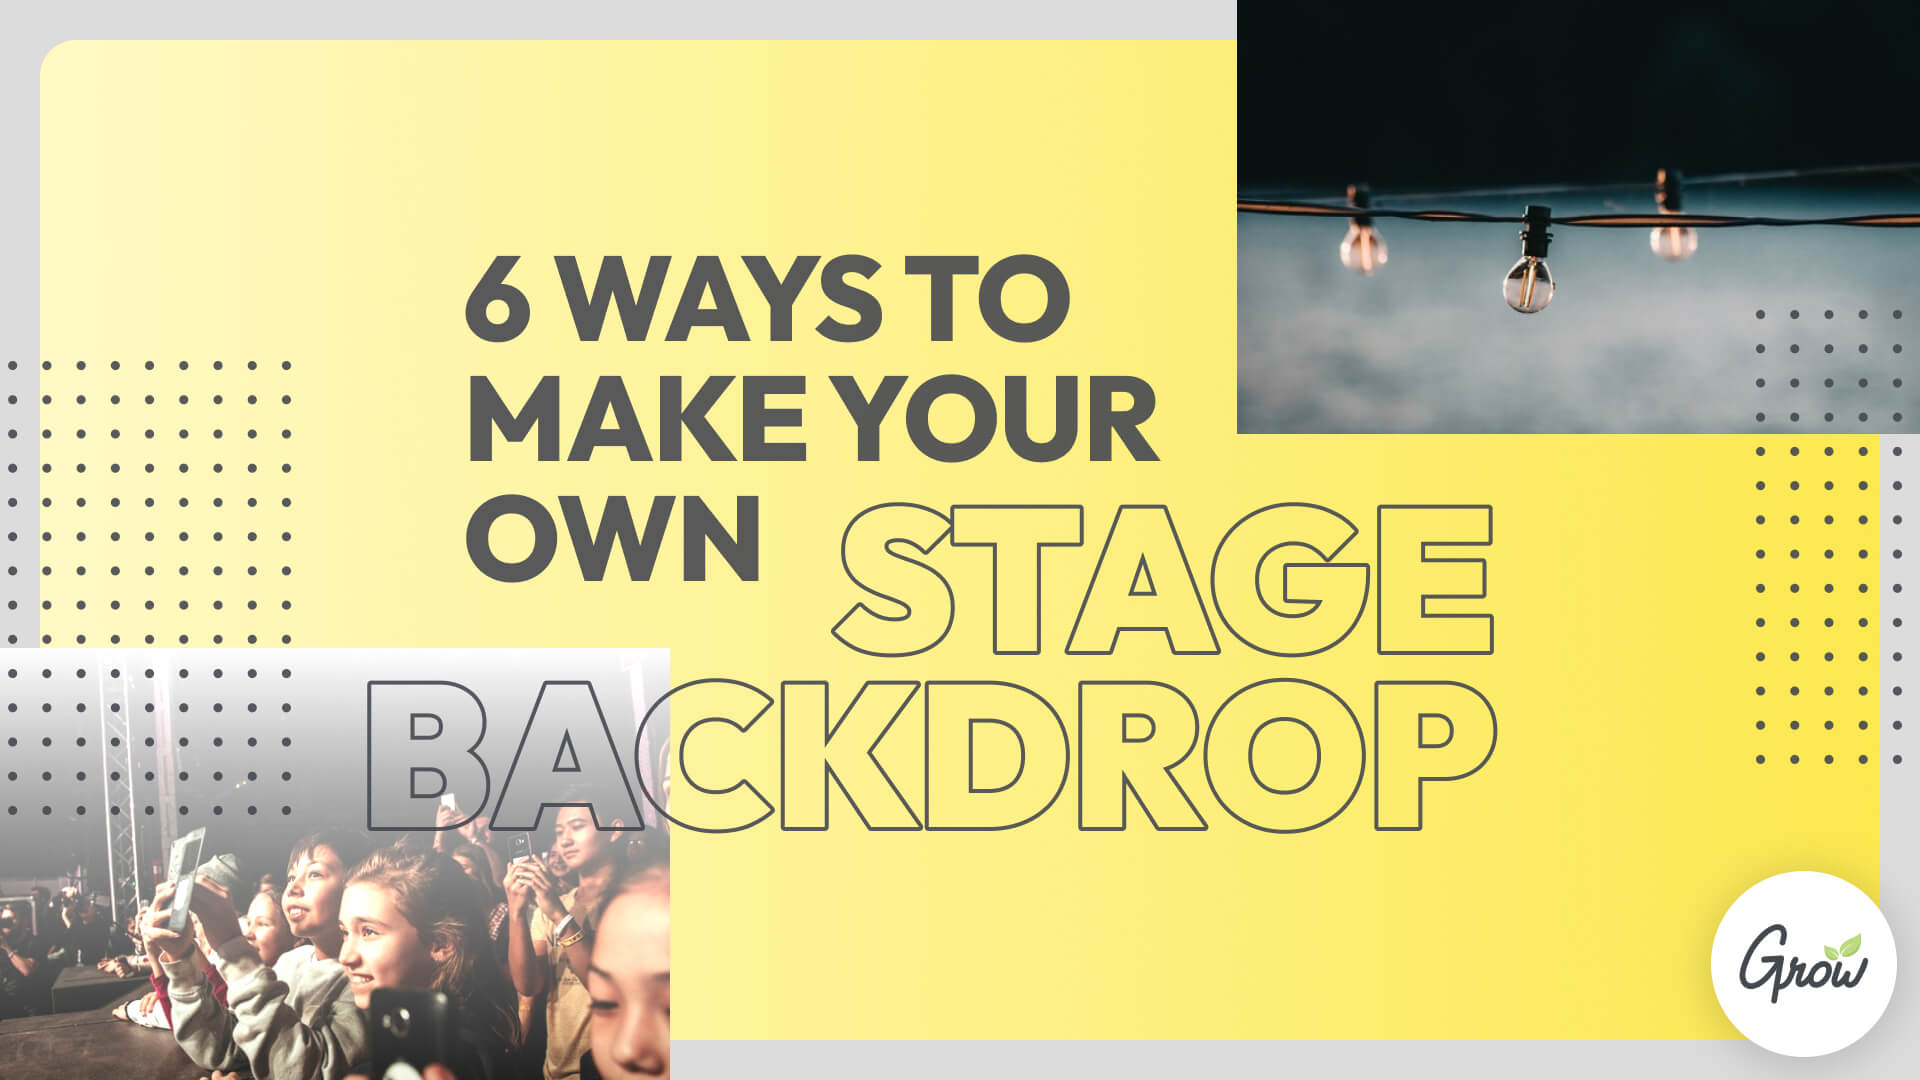 6 Ways to Make Your Own Stage Backdrop